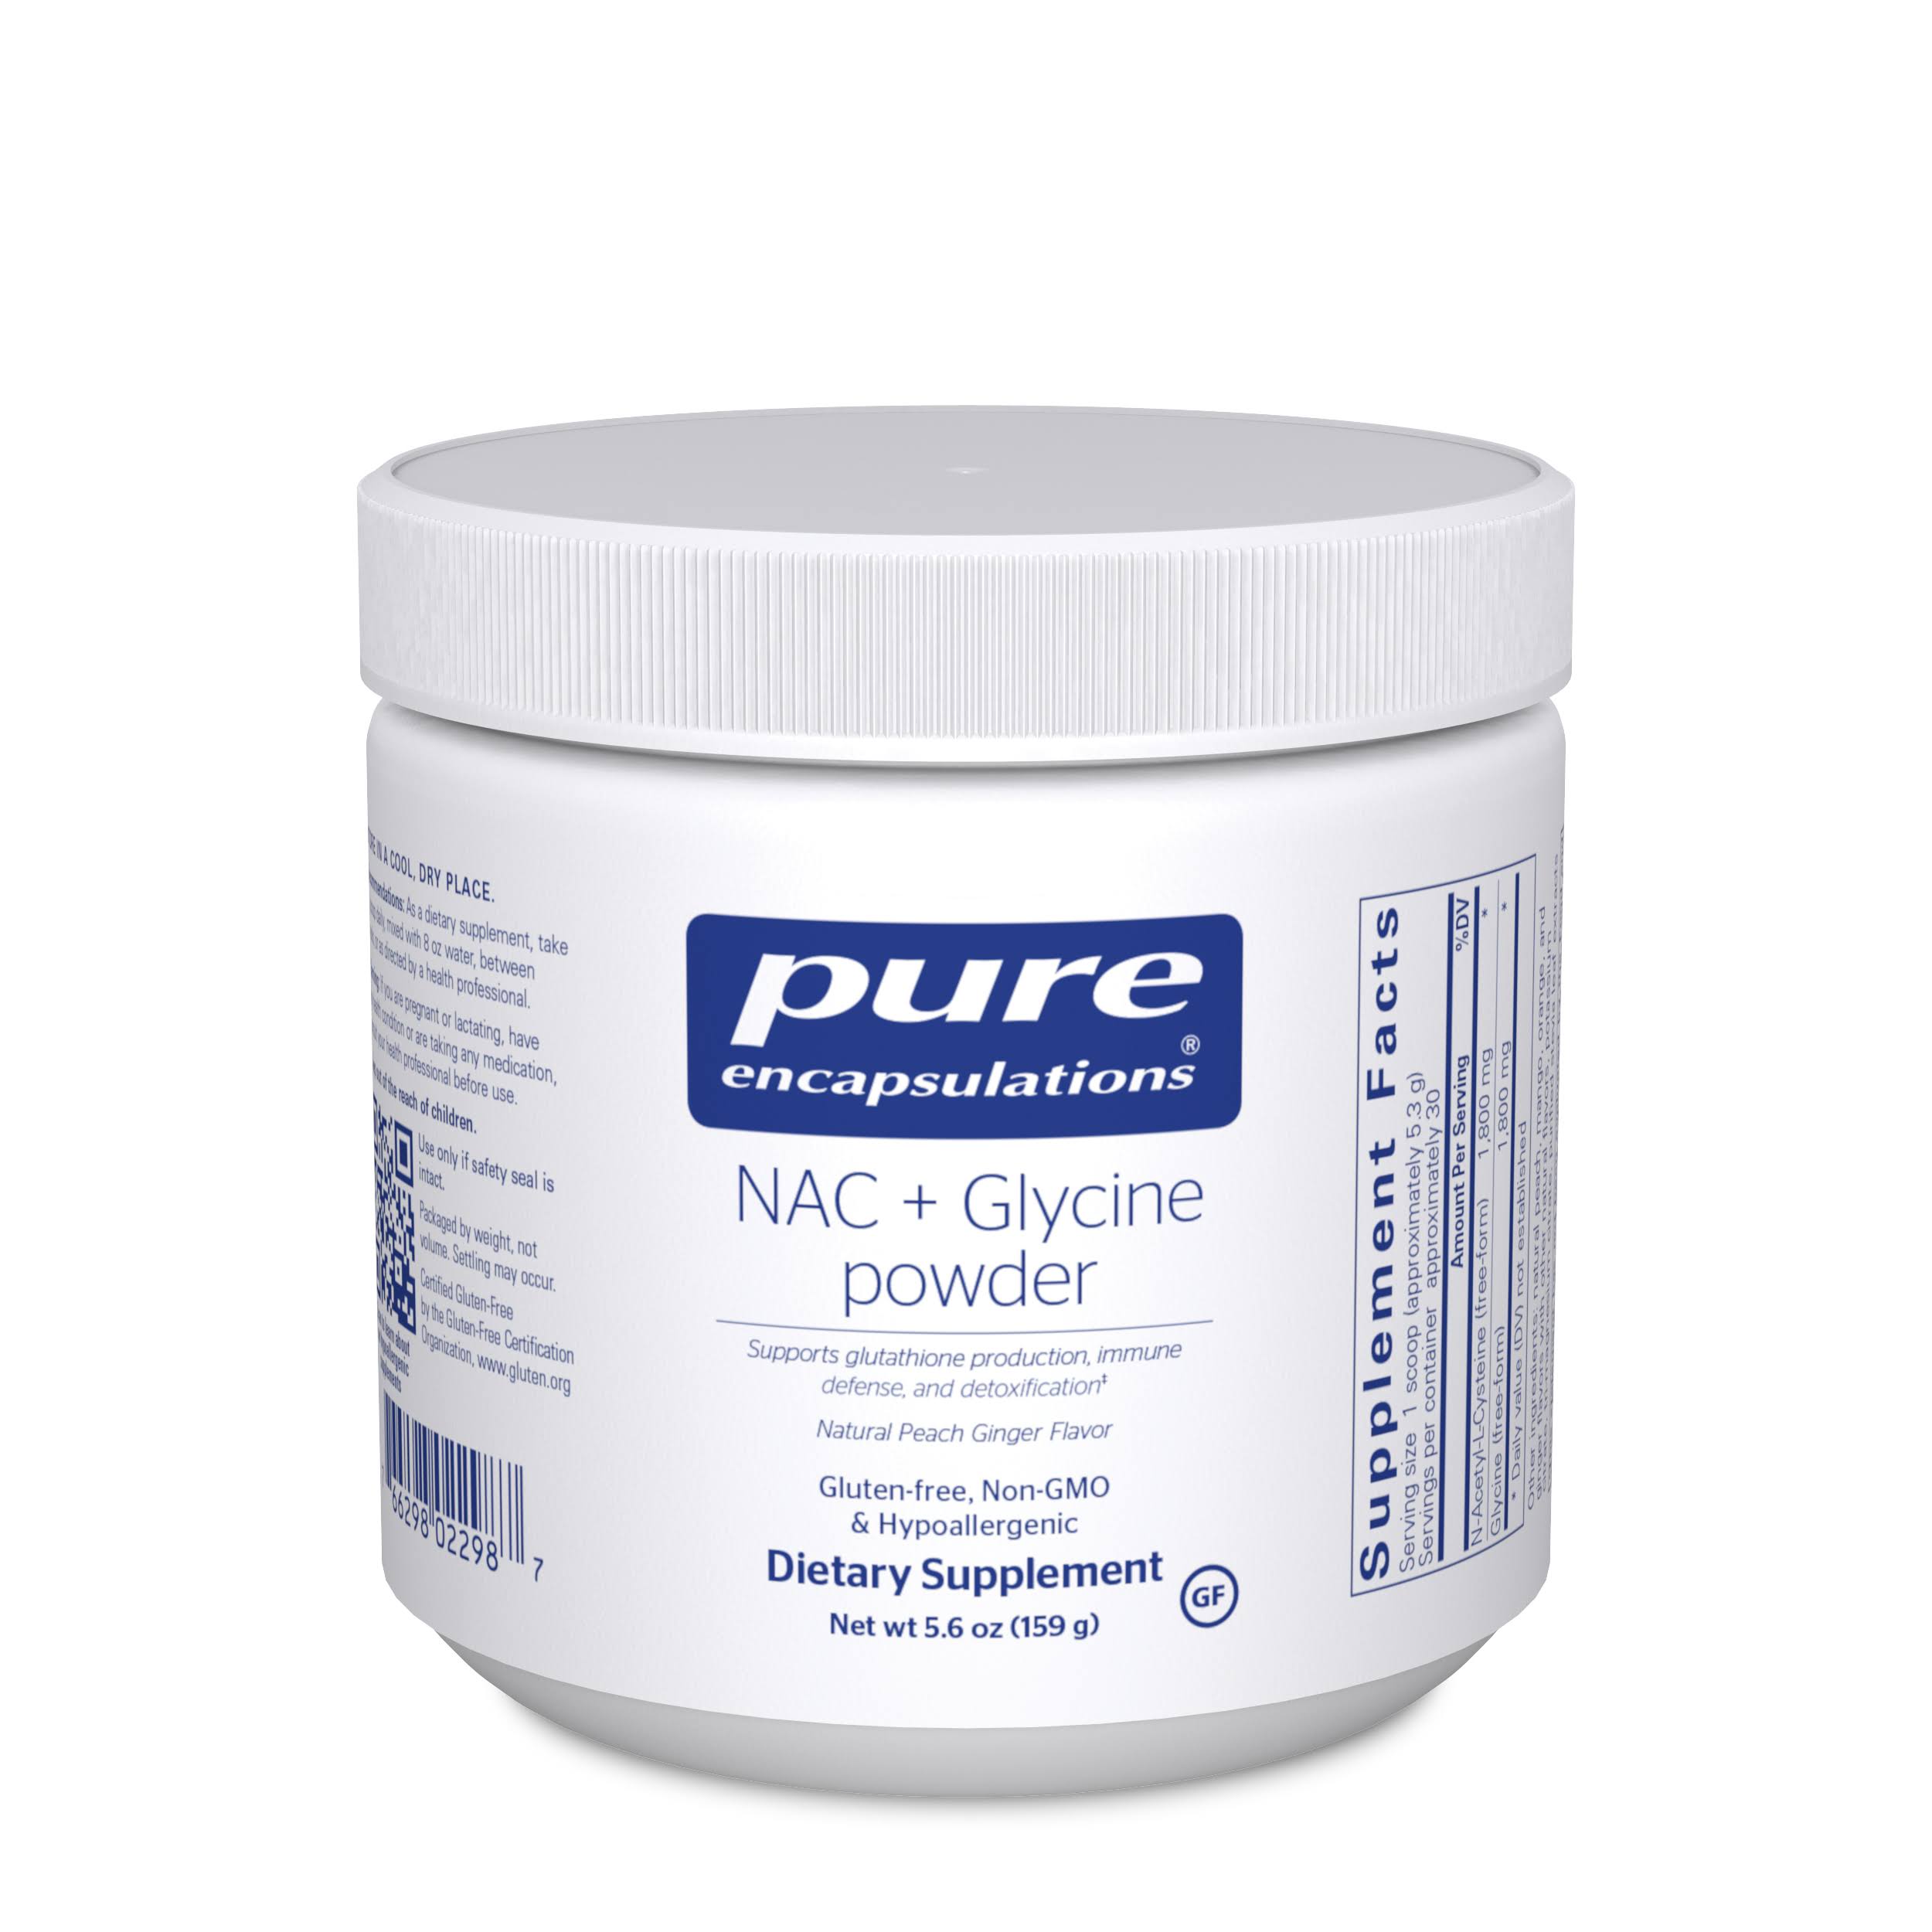 Pure Encapsulations NAC + Glycine Powder | Support for Glutathione Production, Immune Defense, and Detoxification* | 5.6 Ounces | Natural Peach